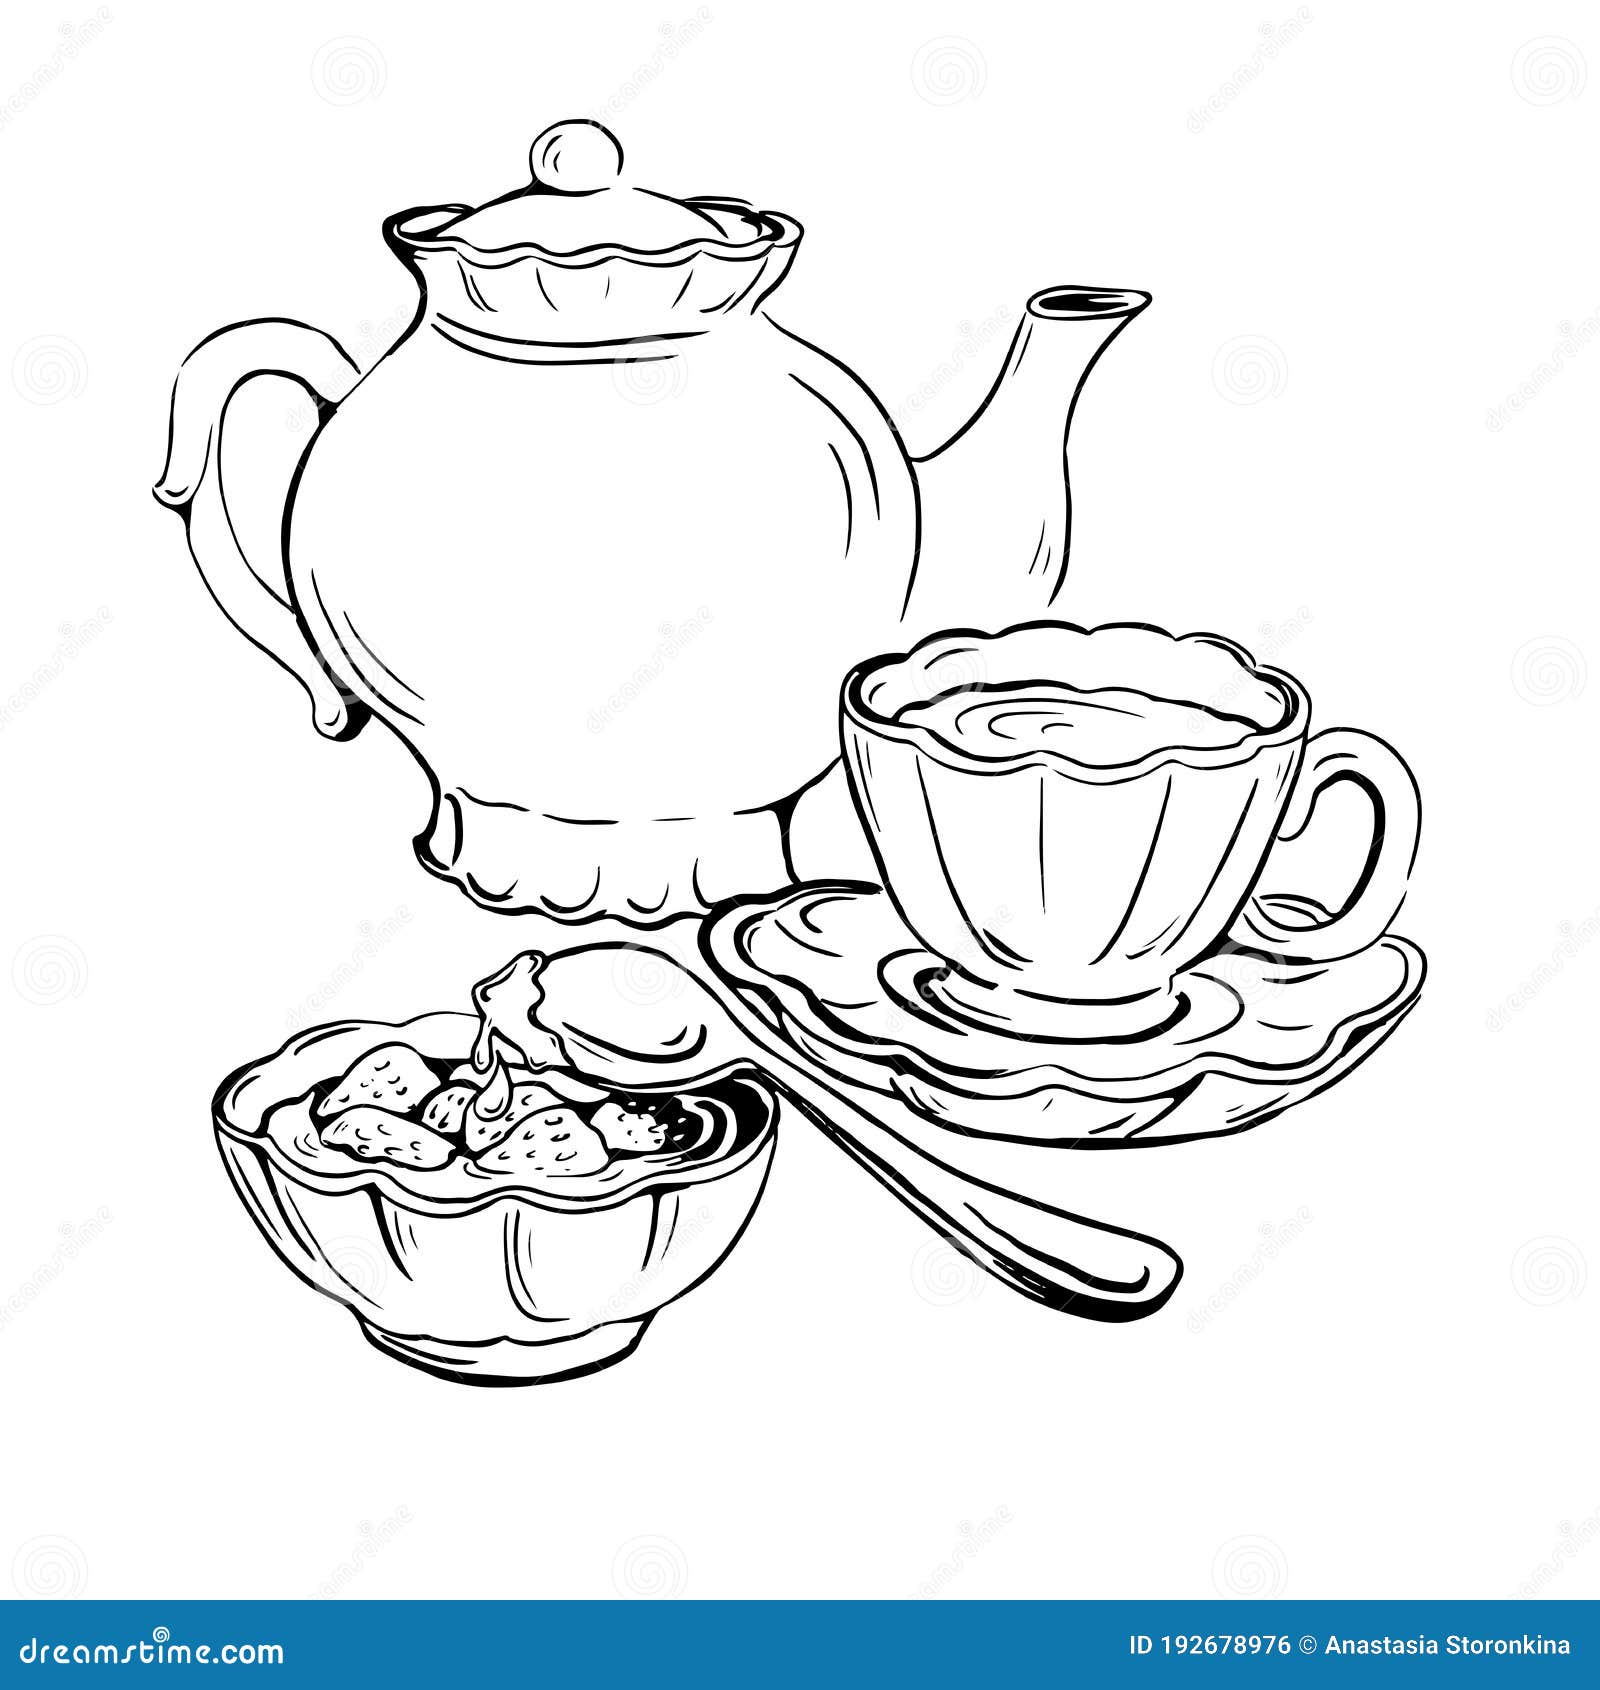 HOW TO DRAW A CUP OF TEA  DRAWING CUP OF COFFEE  YouTube